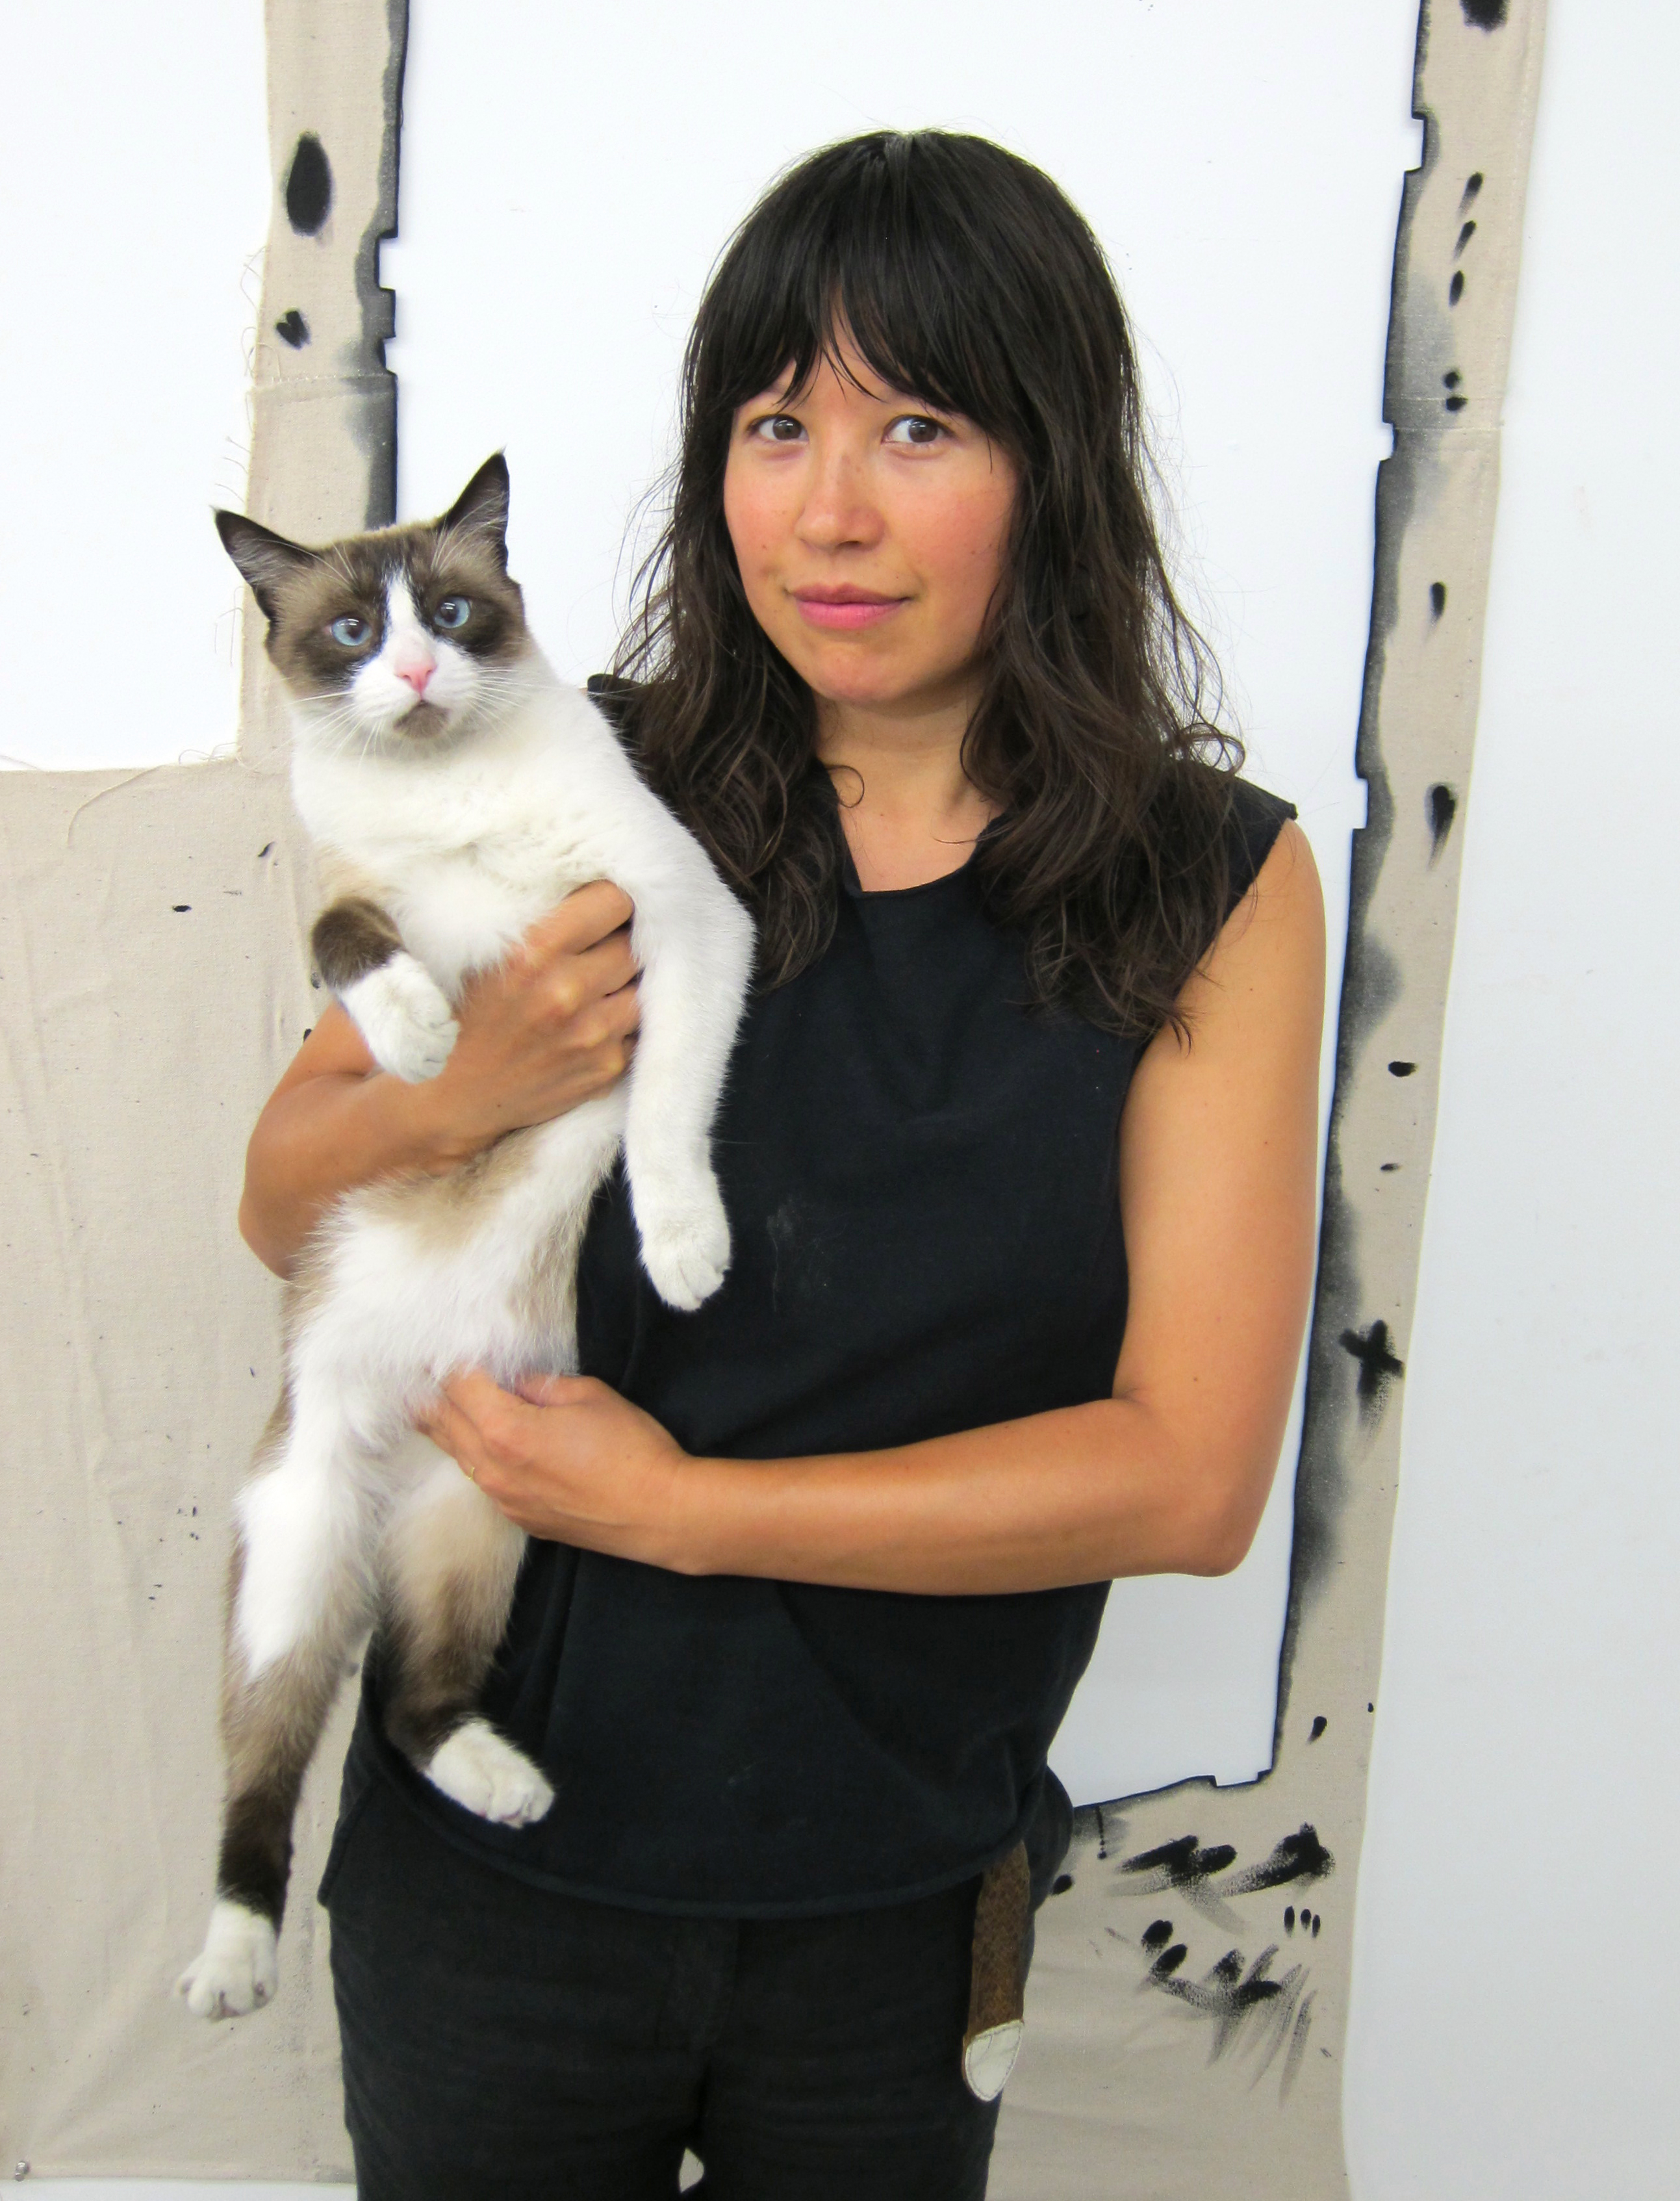 Amanda Ross-Ho with her cat, Jorge. Courtesy of the artist.